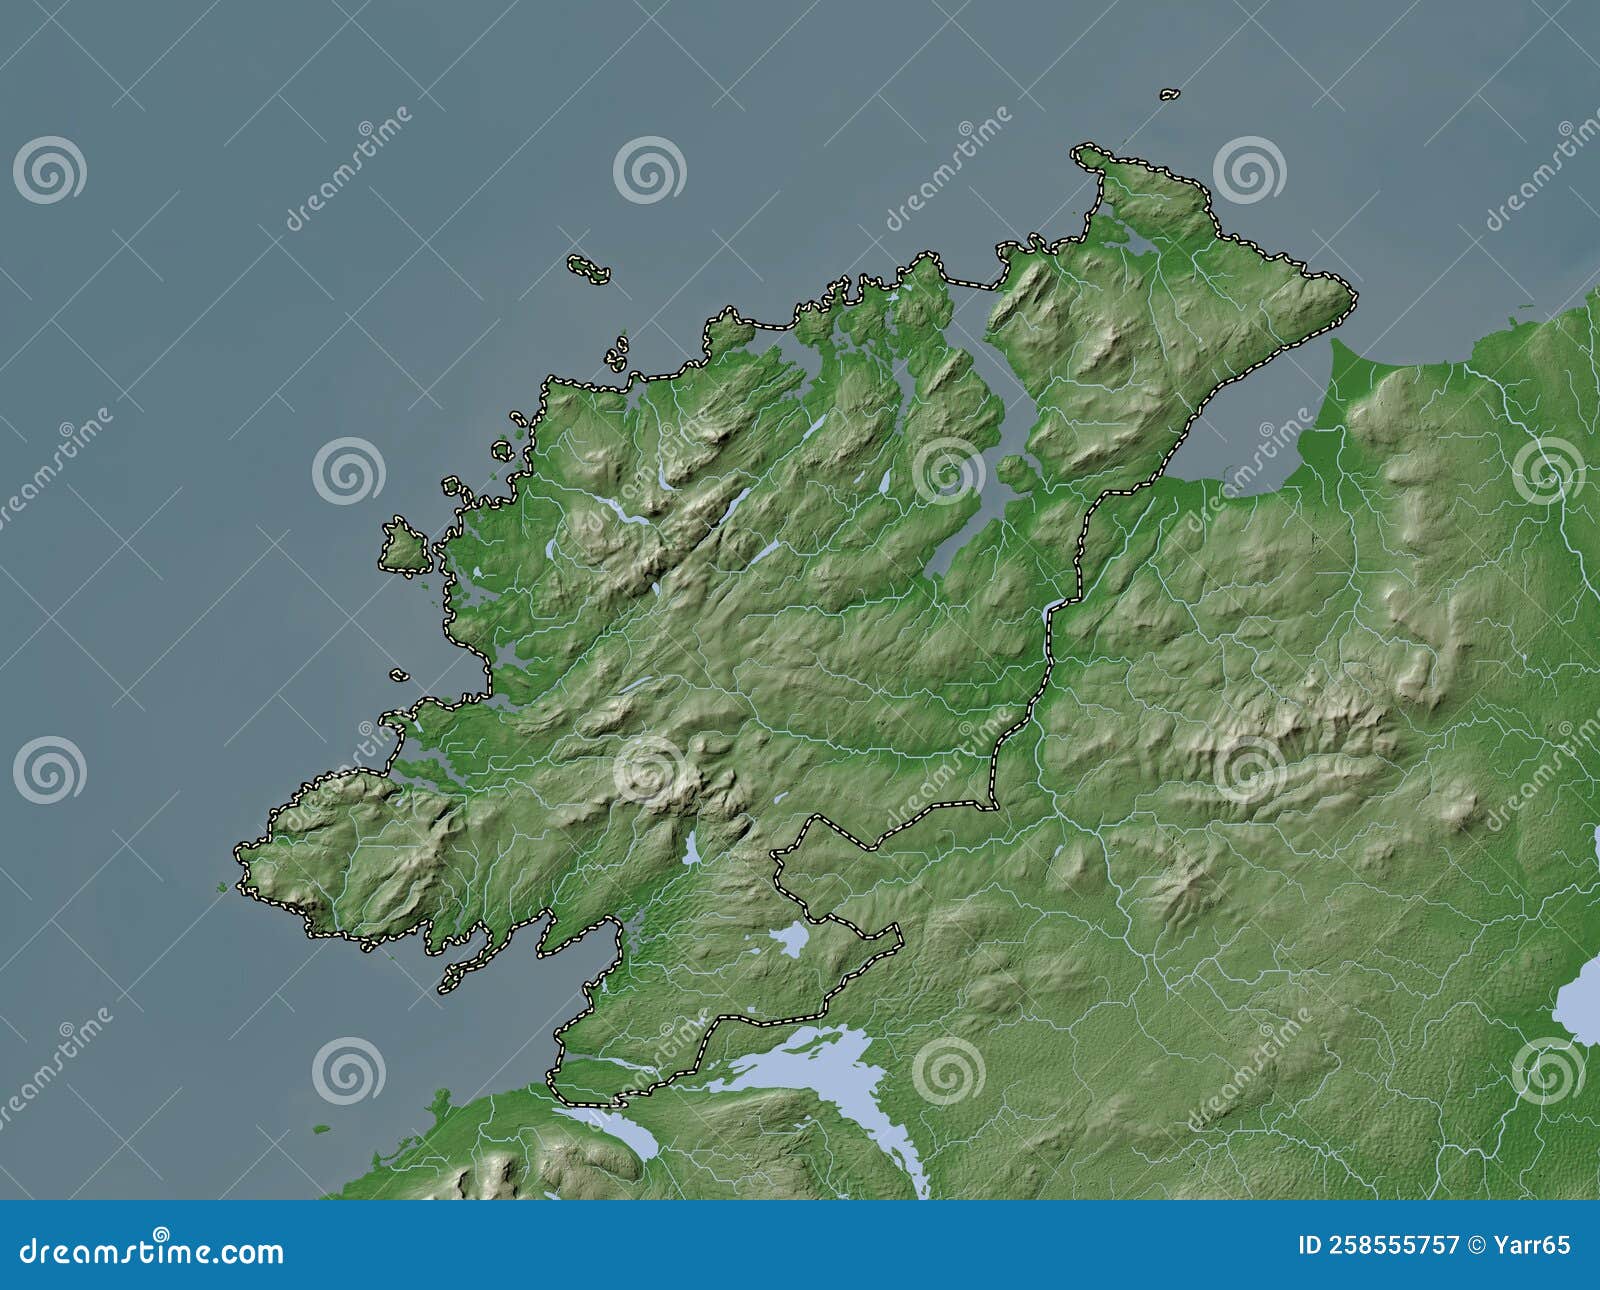 Donegal County Ireland Elevation Map Colored Wiki Style Lakes Rivers Donegal Ireland Wiki No Legend 258555757 